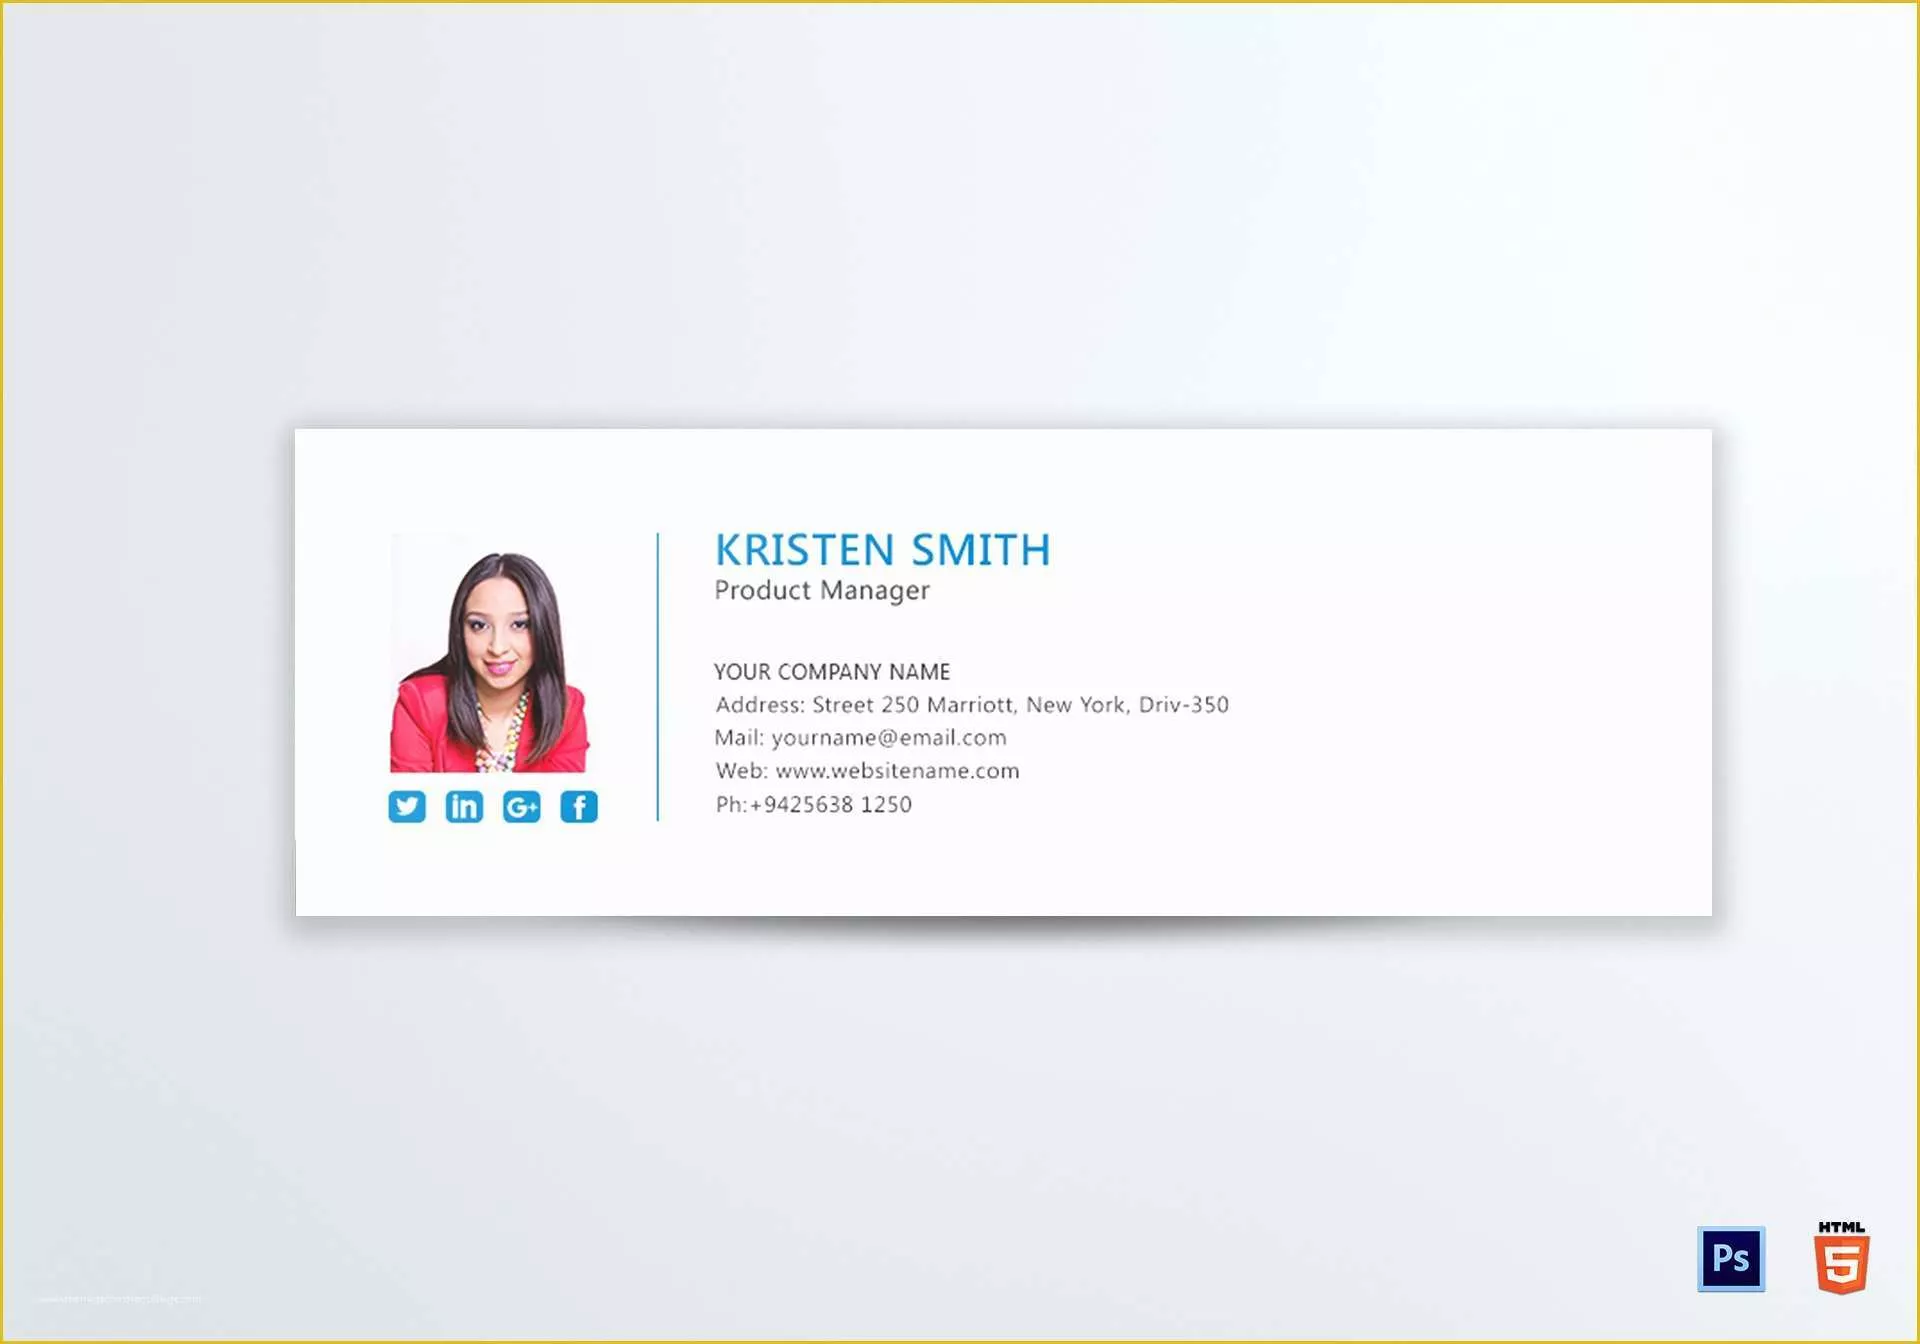 Professional Email Signature Templates Free Of Professional Product Manager Email Signature Design